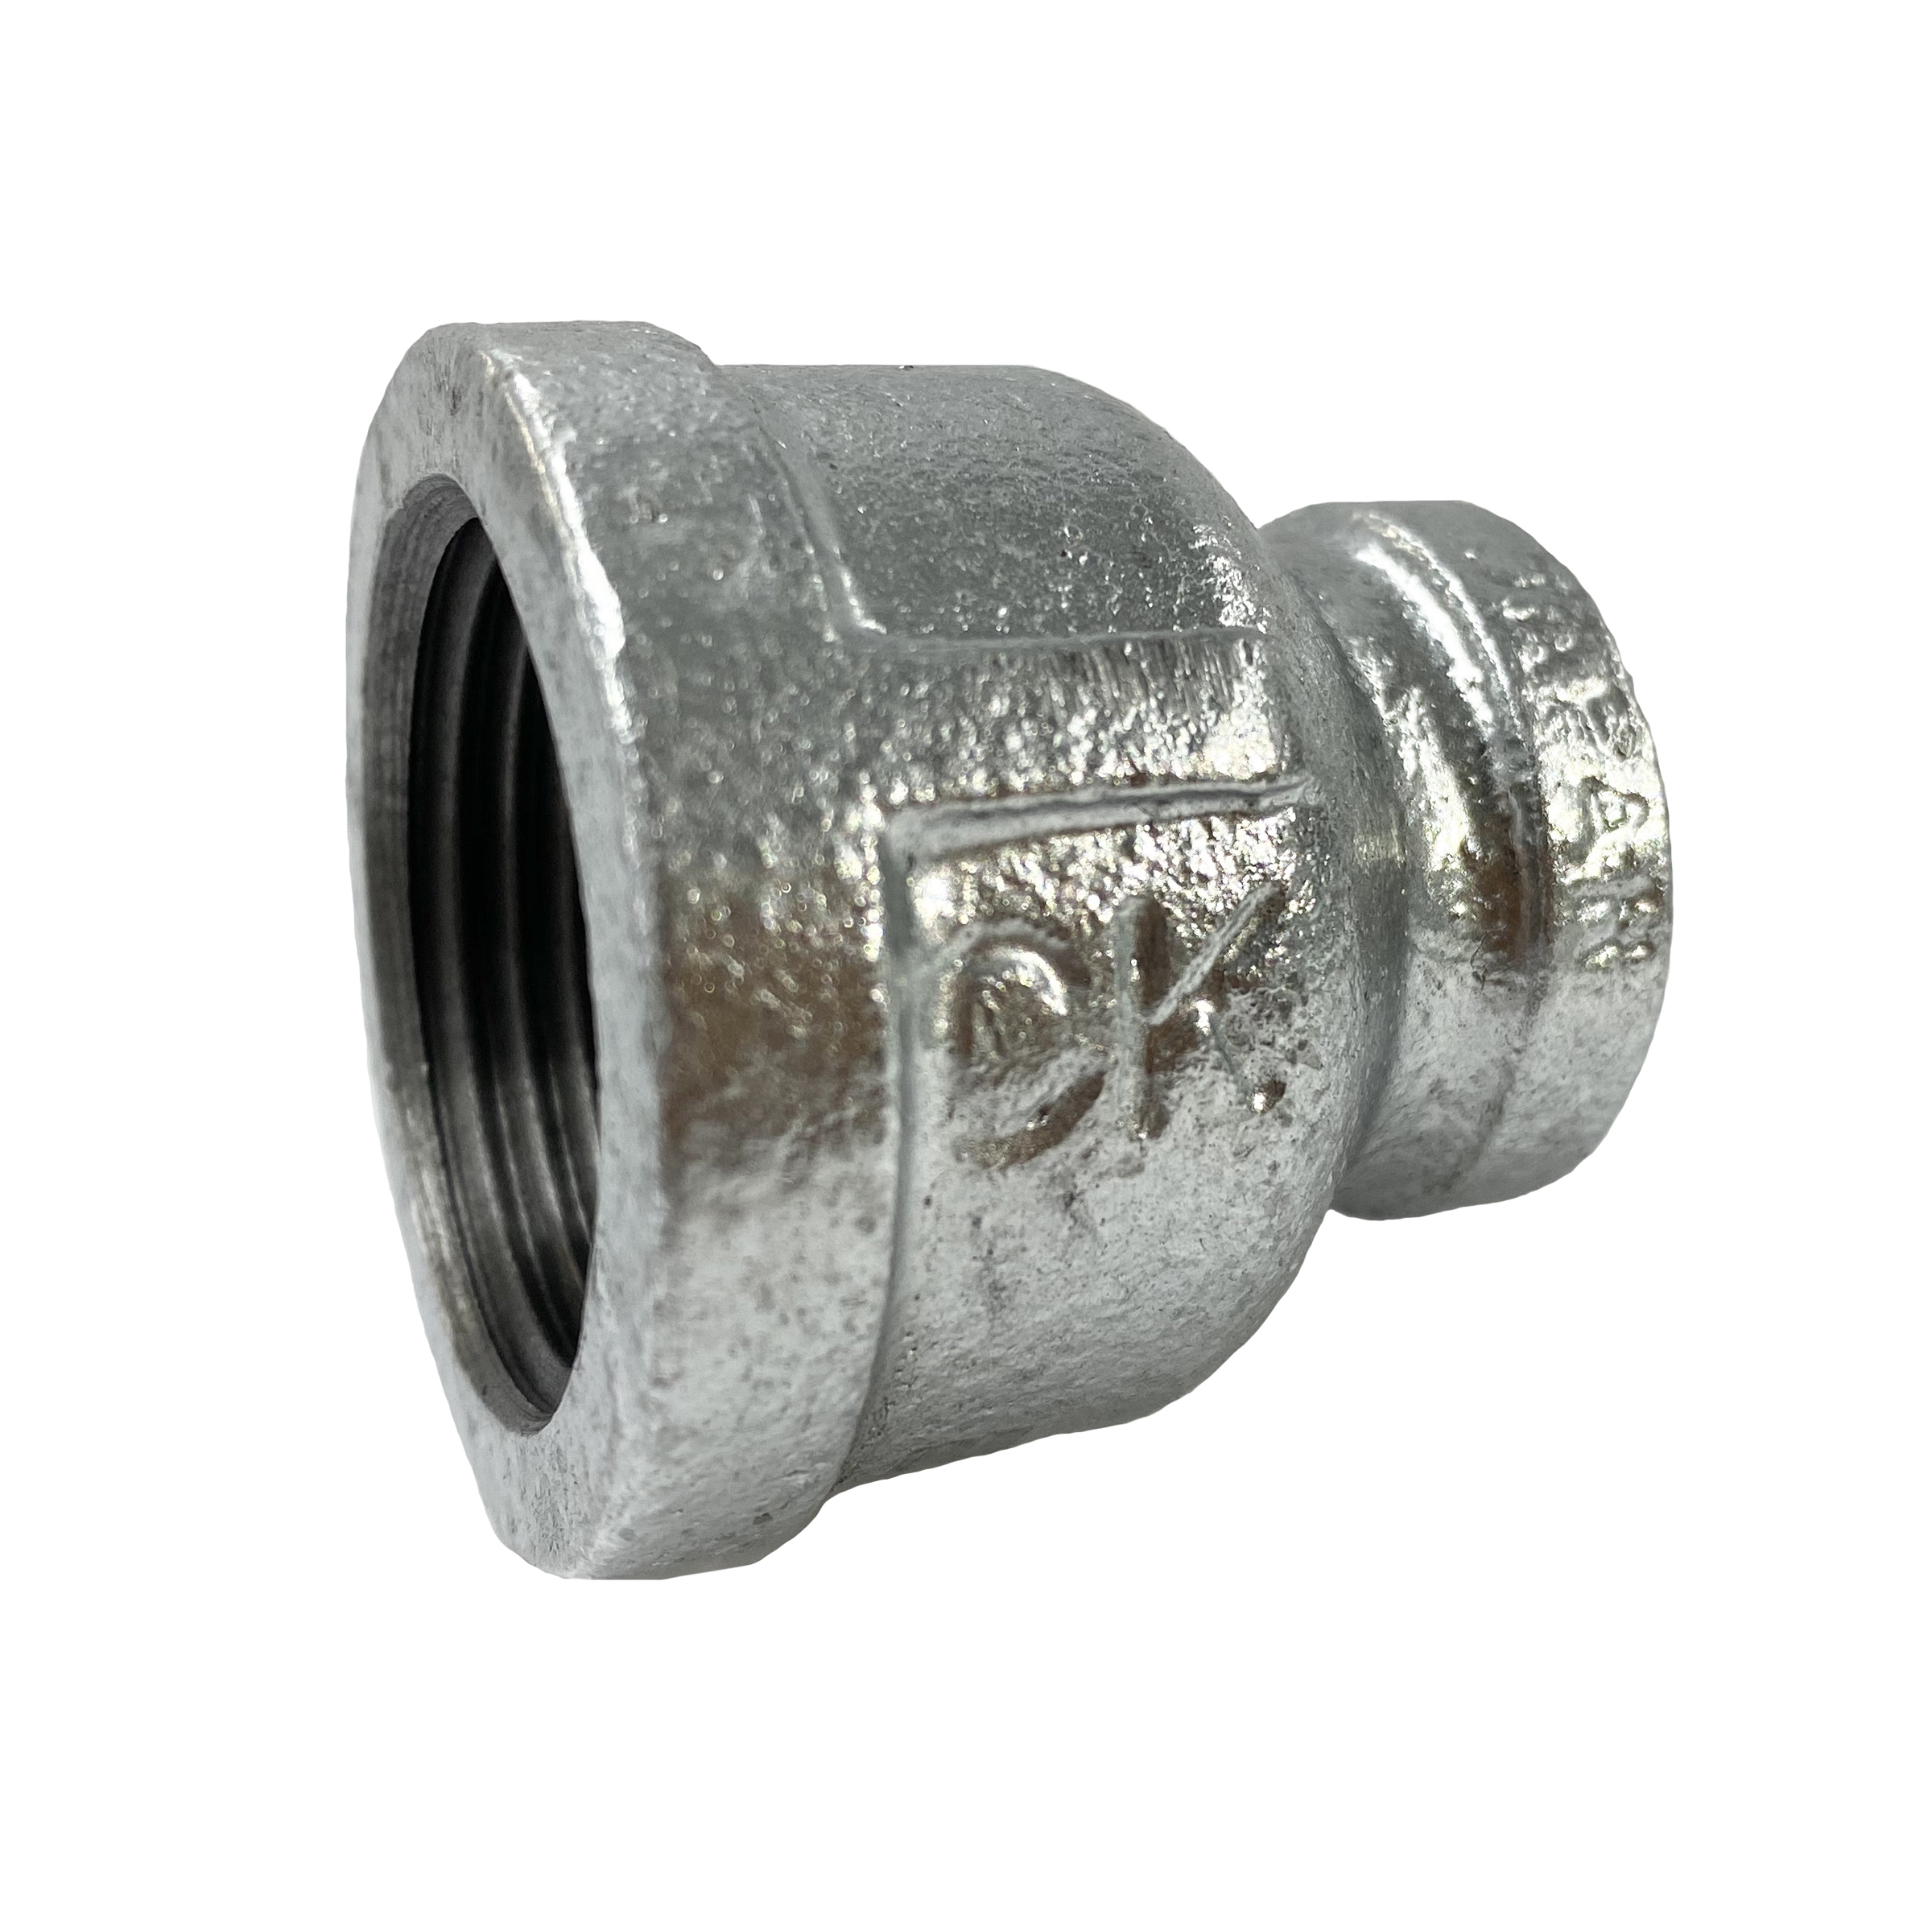 CK Fittings - Screw-in Type Malleable Cast Iron Pipe Fitting - Socket with Different Diameters with Band BRS-50X15-W